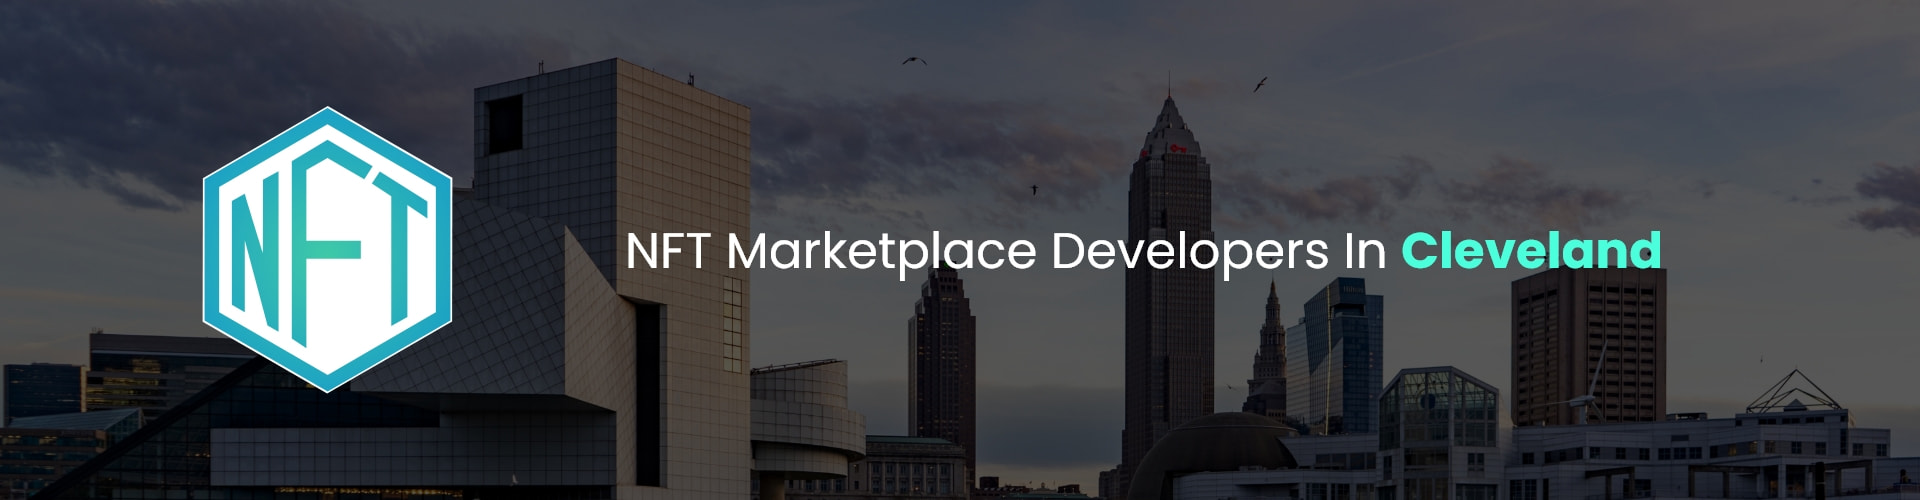 hire nft marketplace developers in cleveland